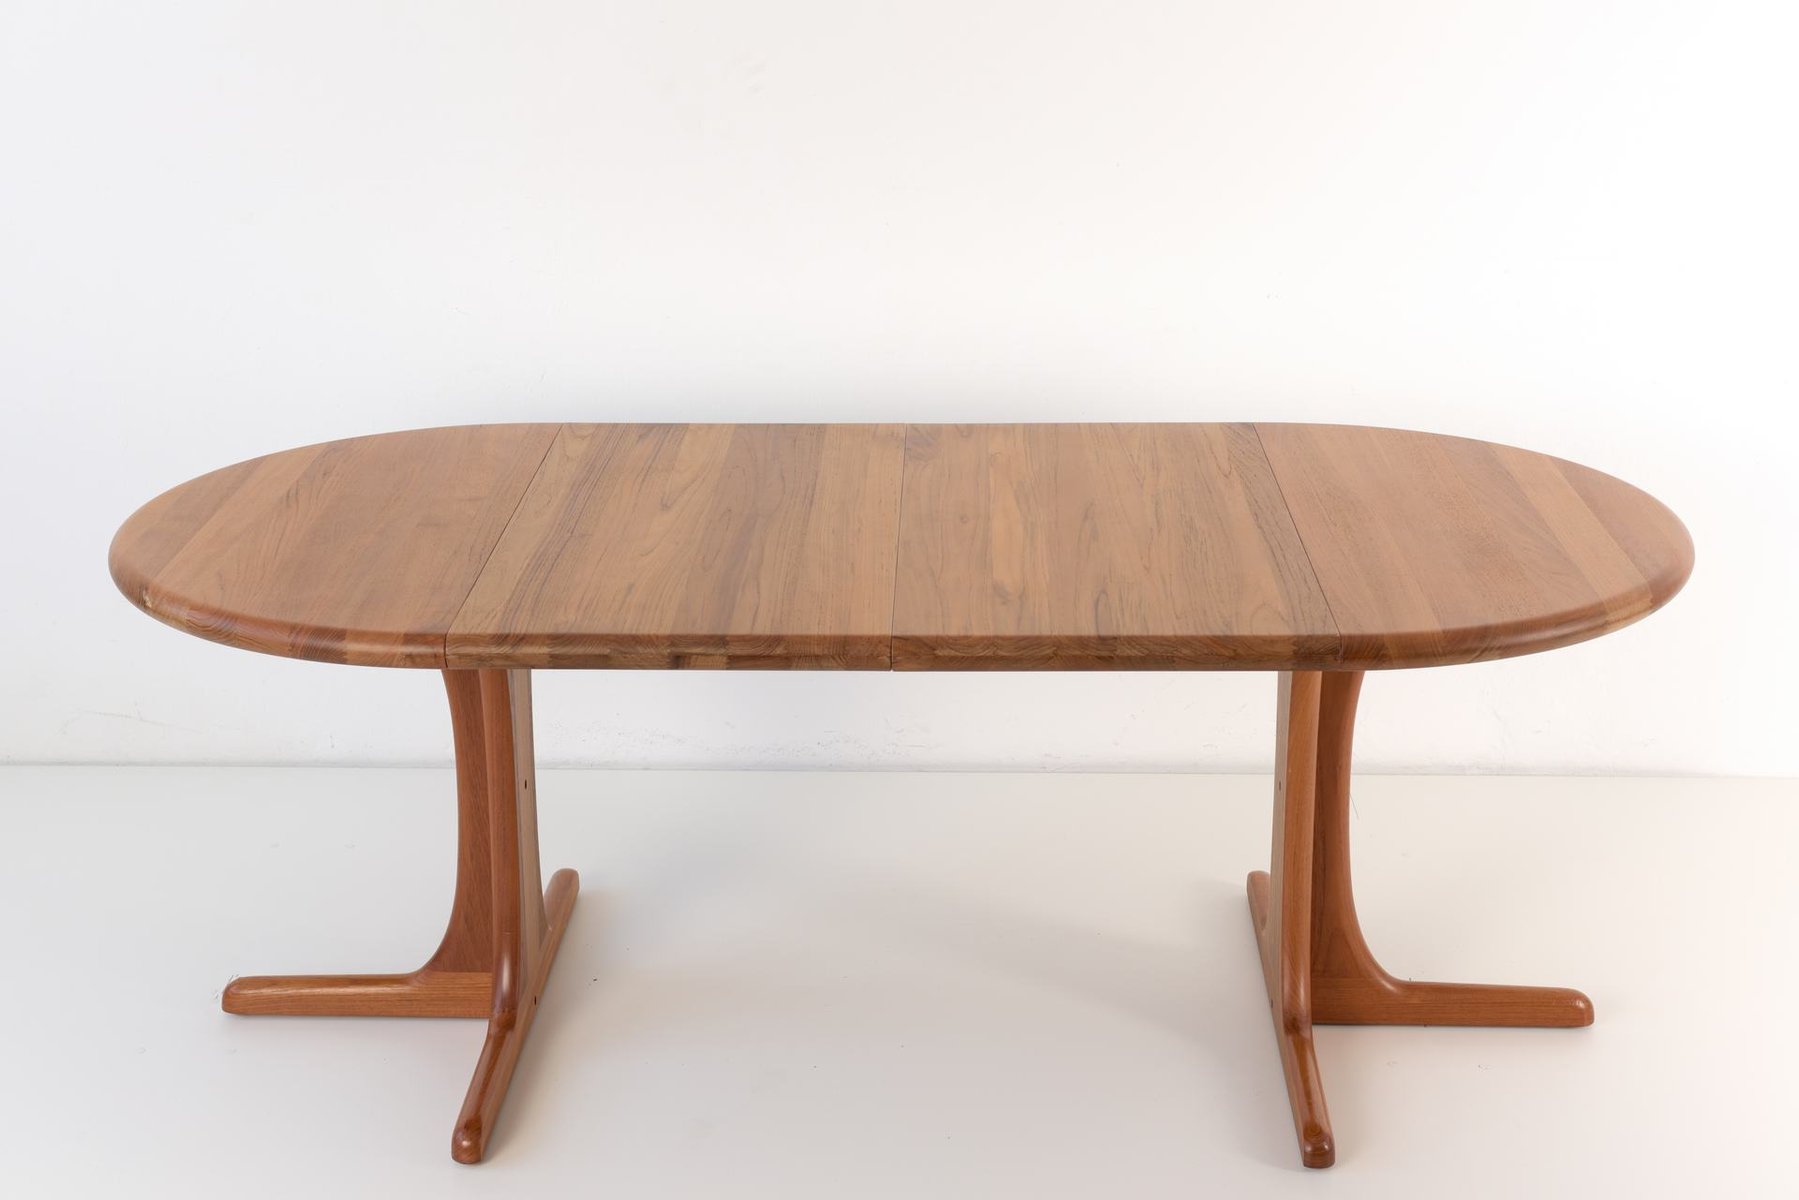 Find The Best Deals With Teak Dining Table On Sale